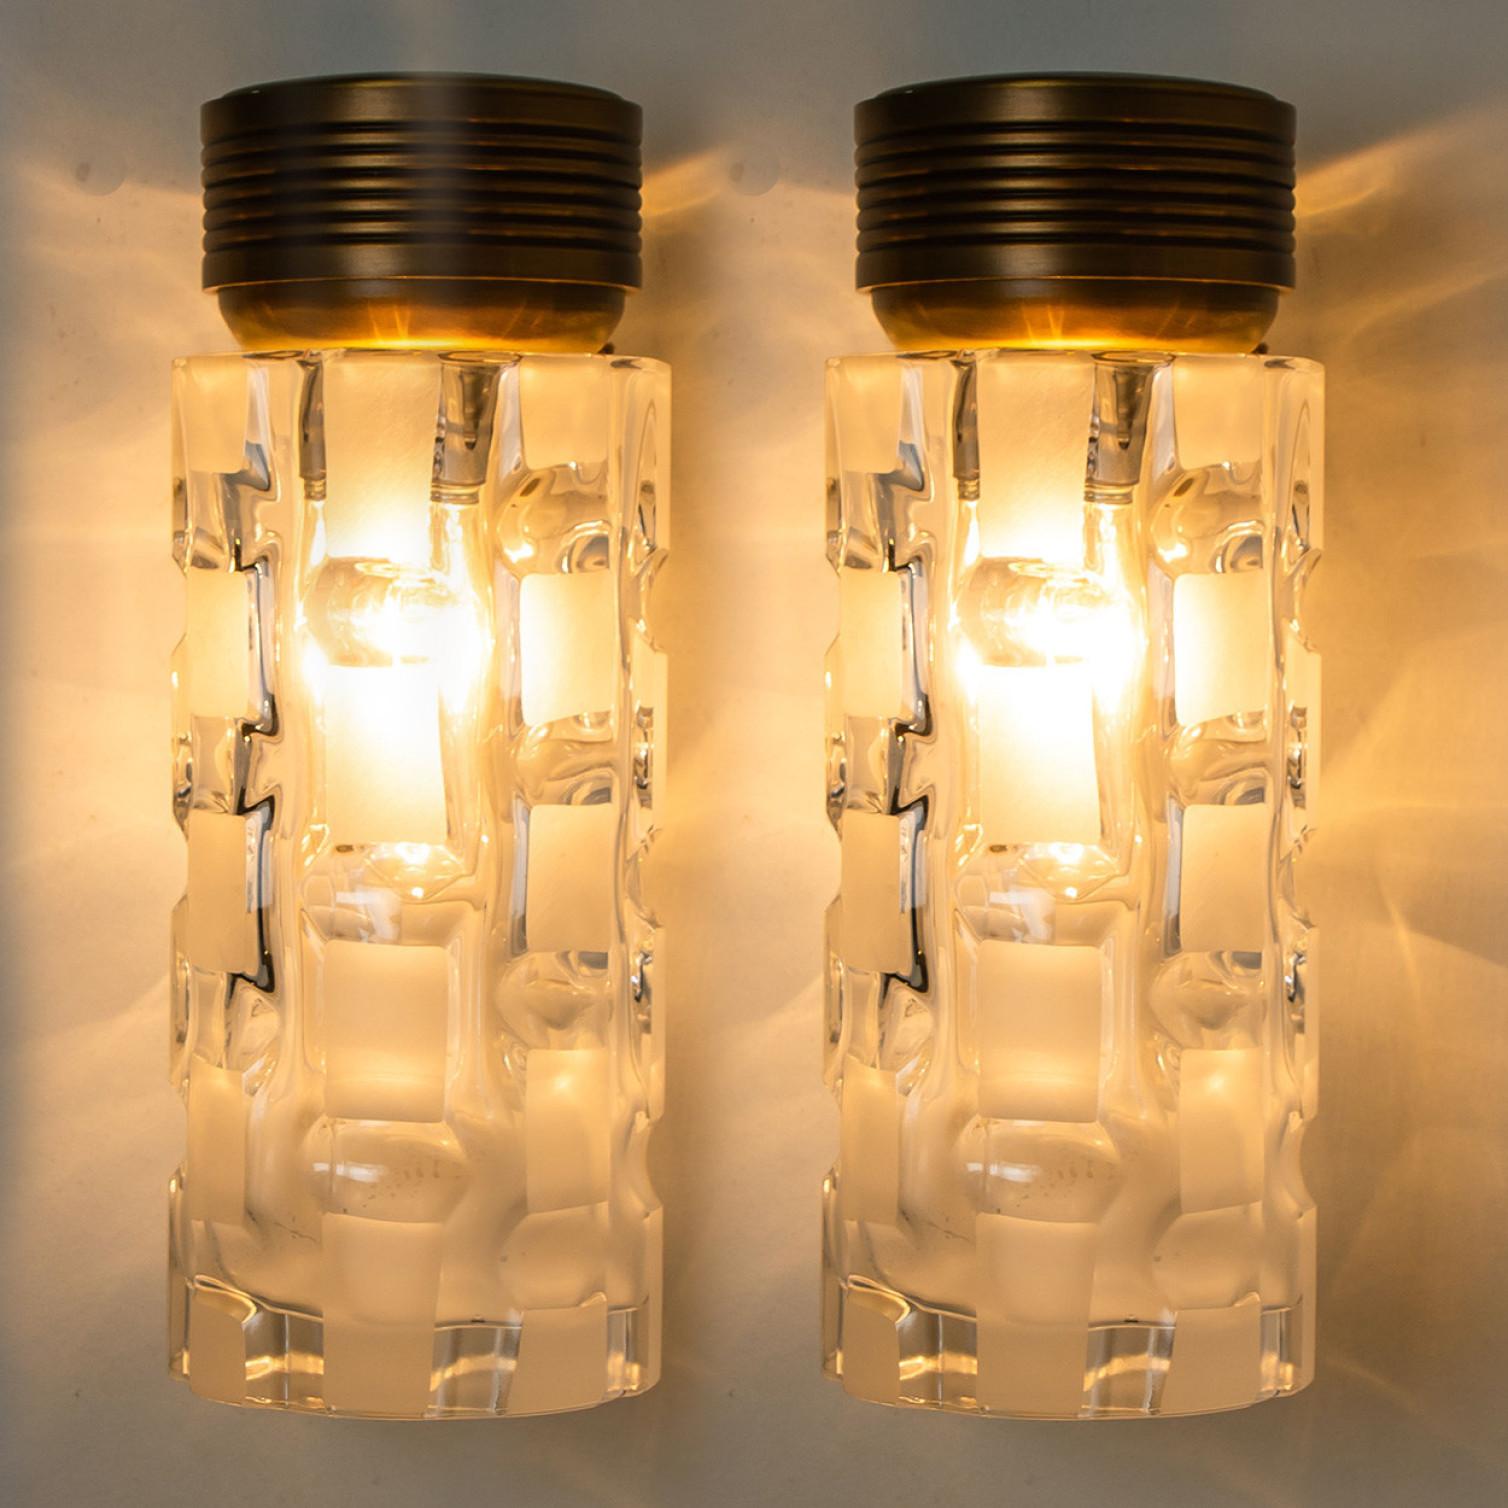 Pair Of Hillebrand Clear and Opaque Glass Wall Light Fixtures, 1970s For Sale 6